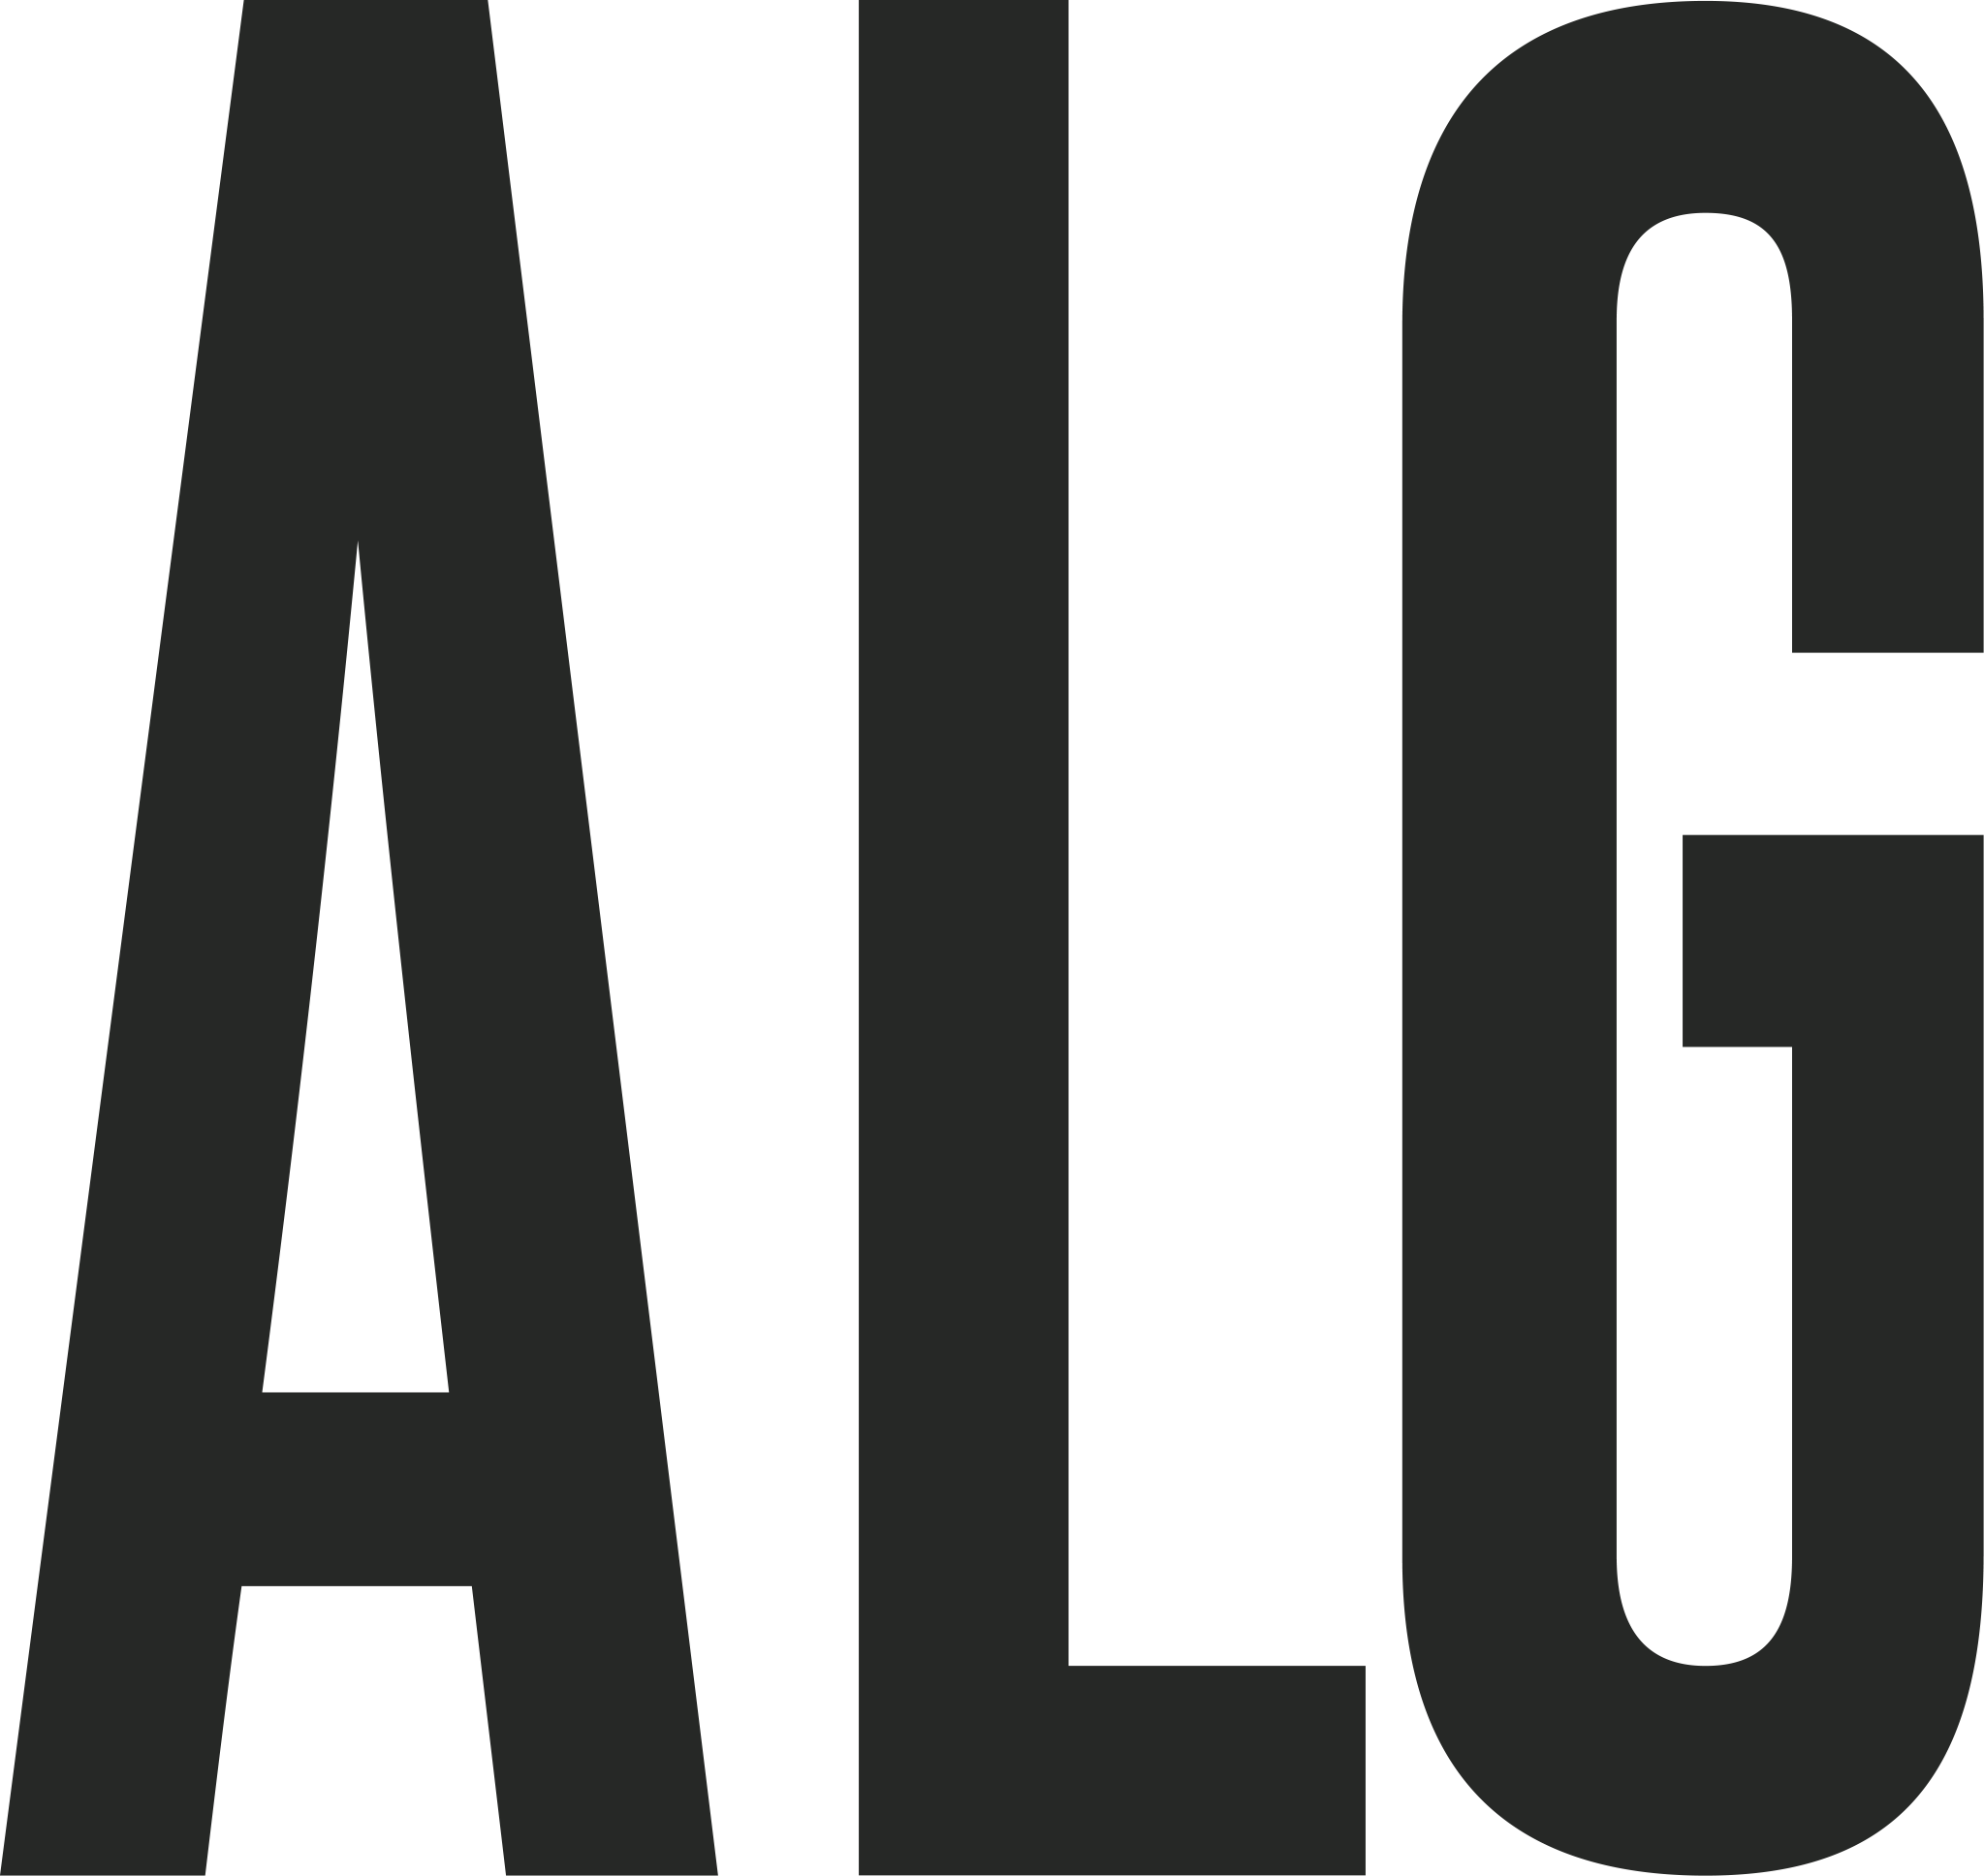 Alg Logo - ALG Brand Management. Rights Licensing and Protection